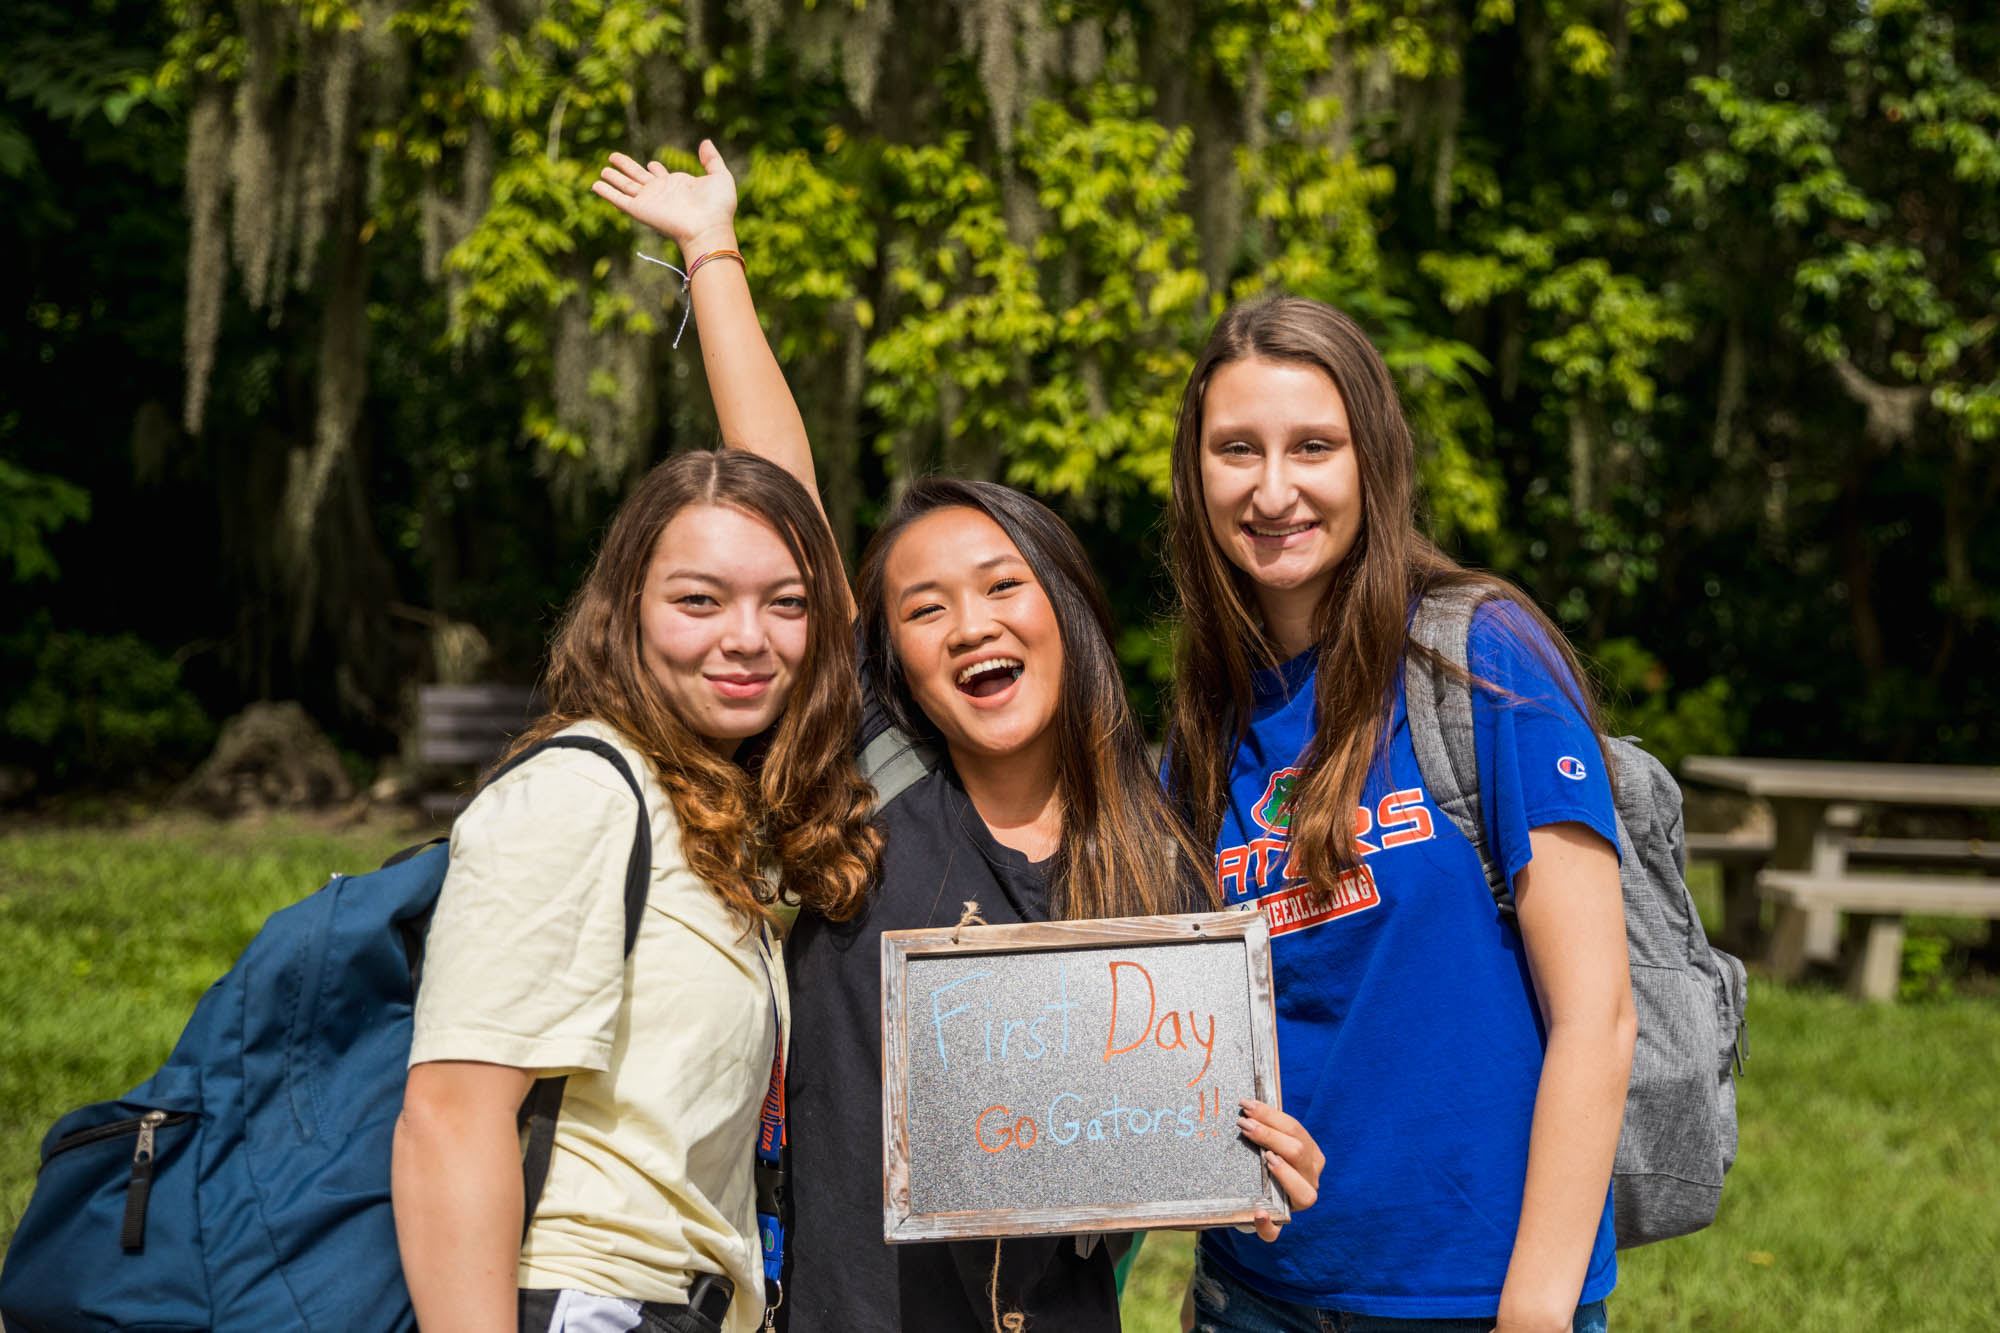 Three student smile and hold a "First Day of Class" sign.